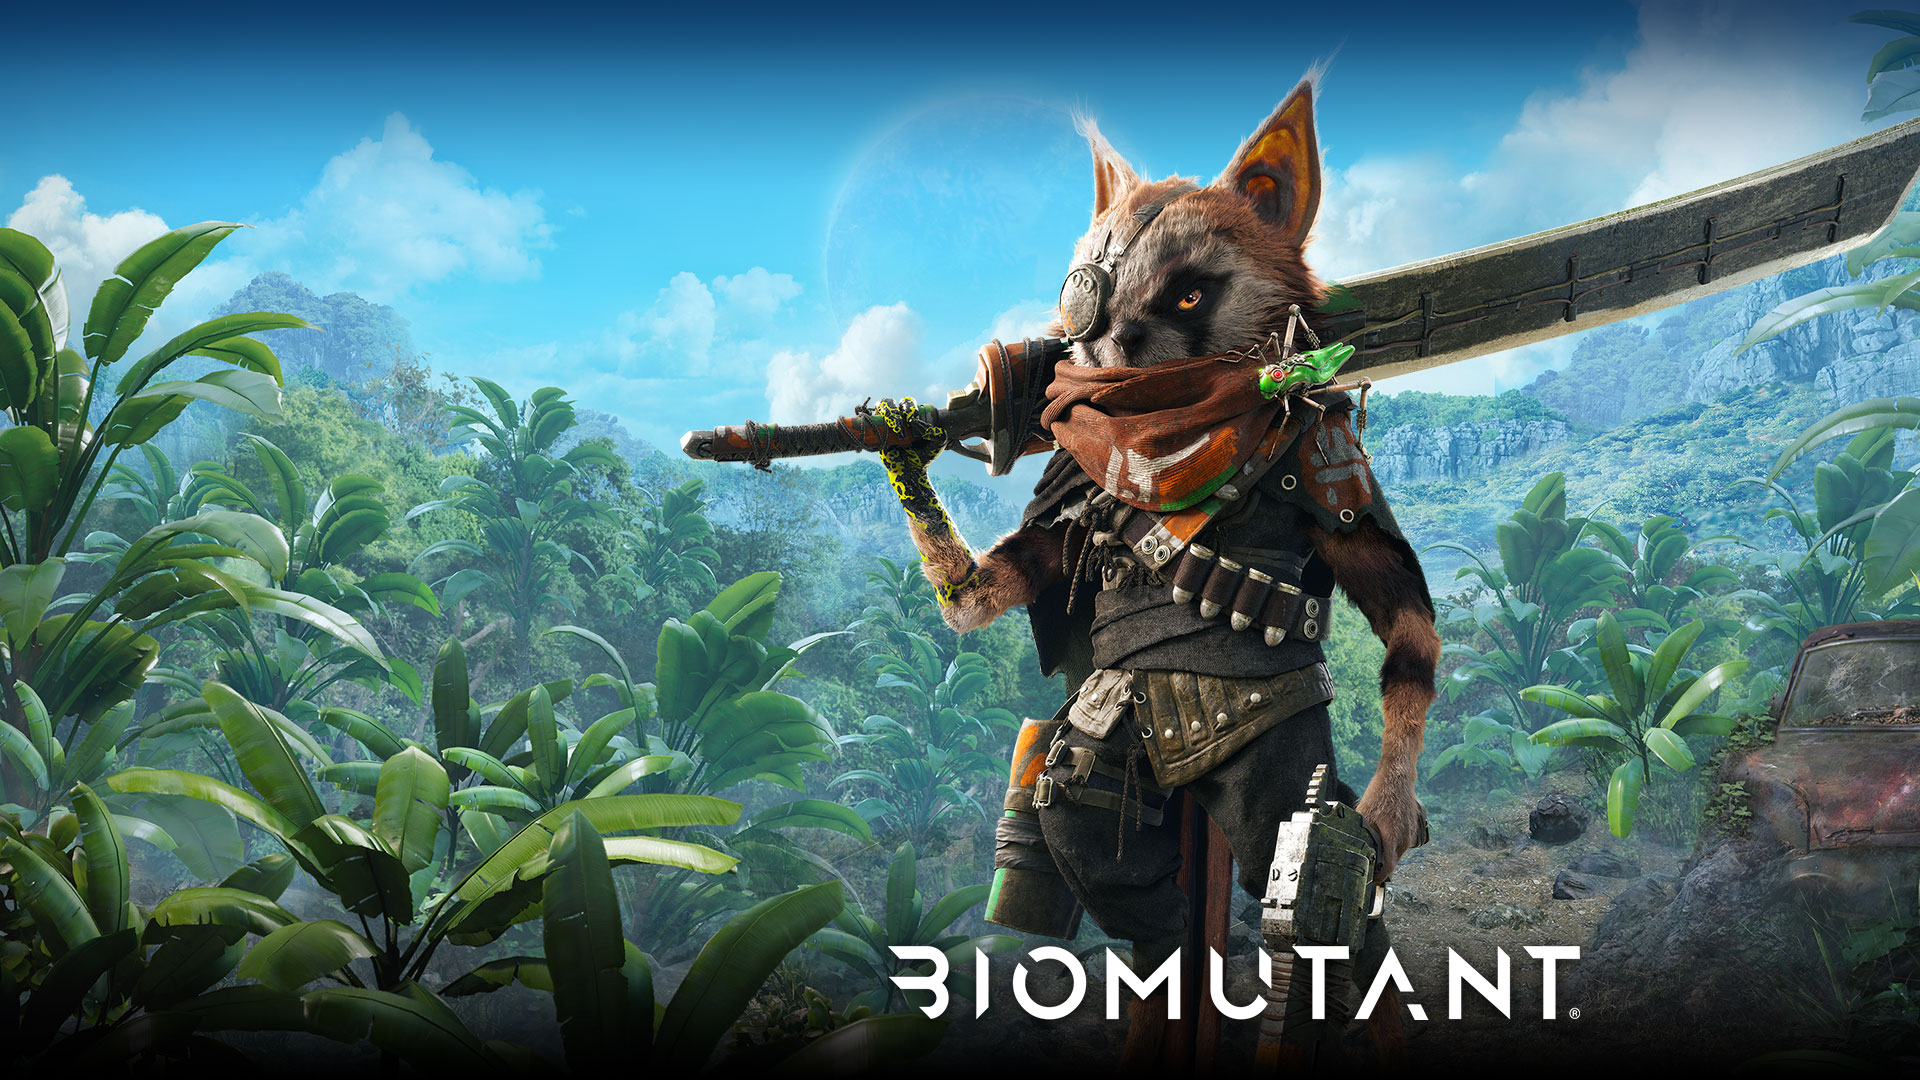 Digital Pre-orders For “Biomutant” Are Now Available For Xbox 